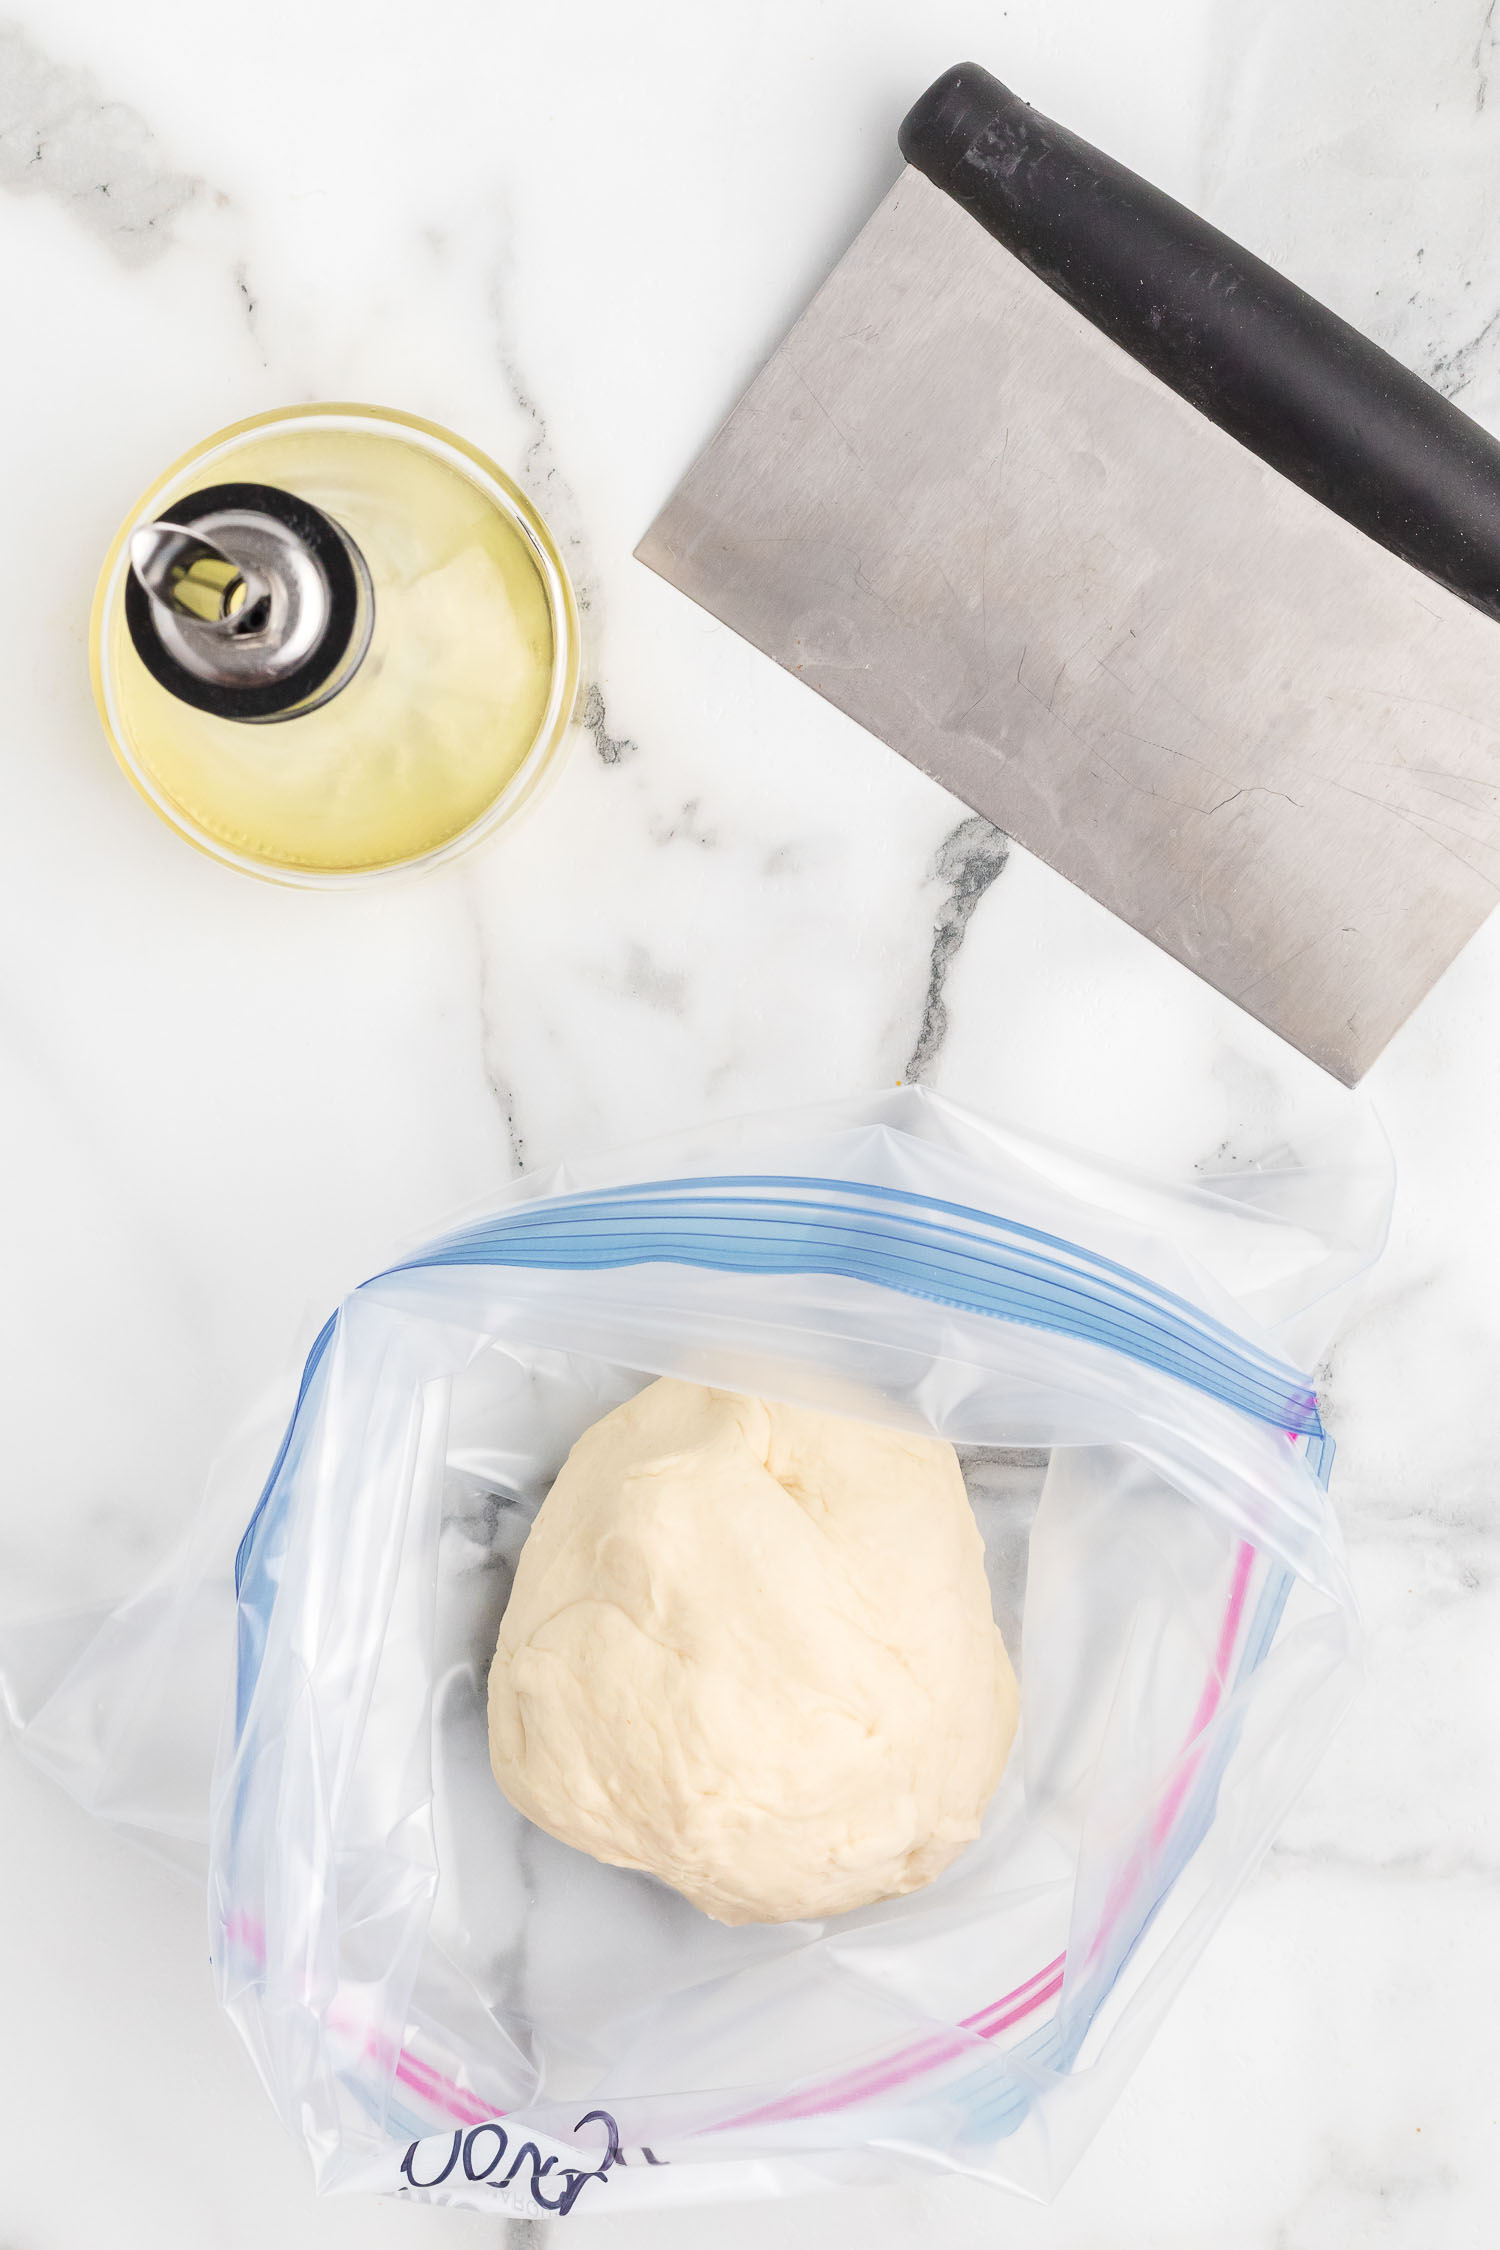 A resealable bag with a ball of dough with oil and a dough cutter.